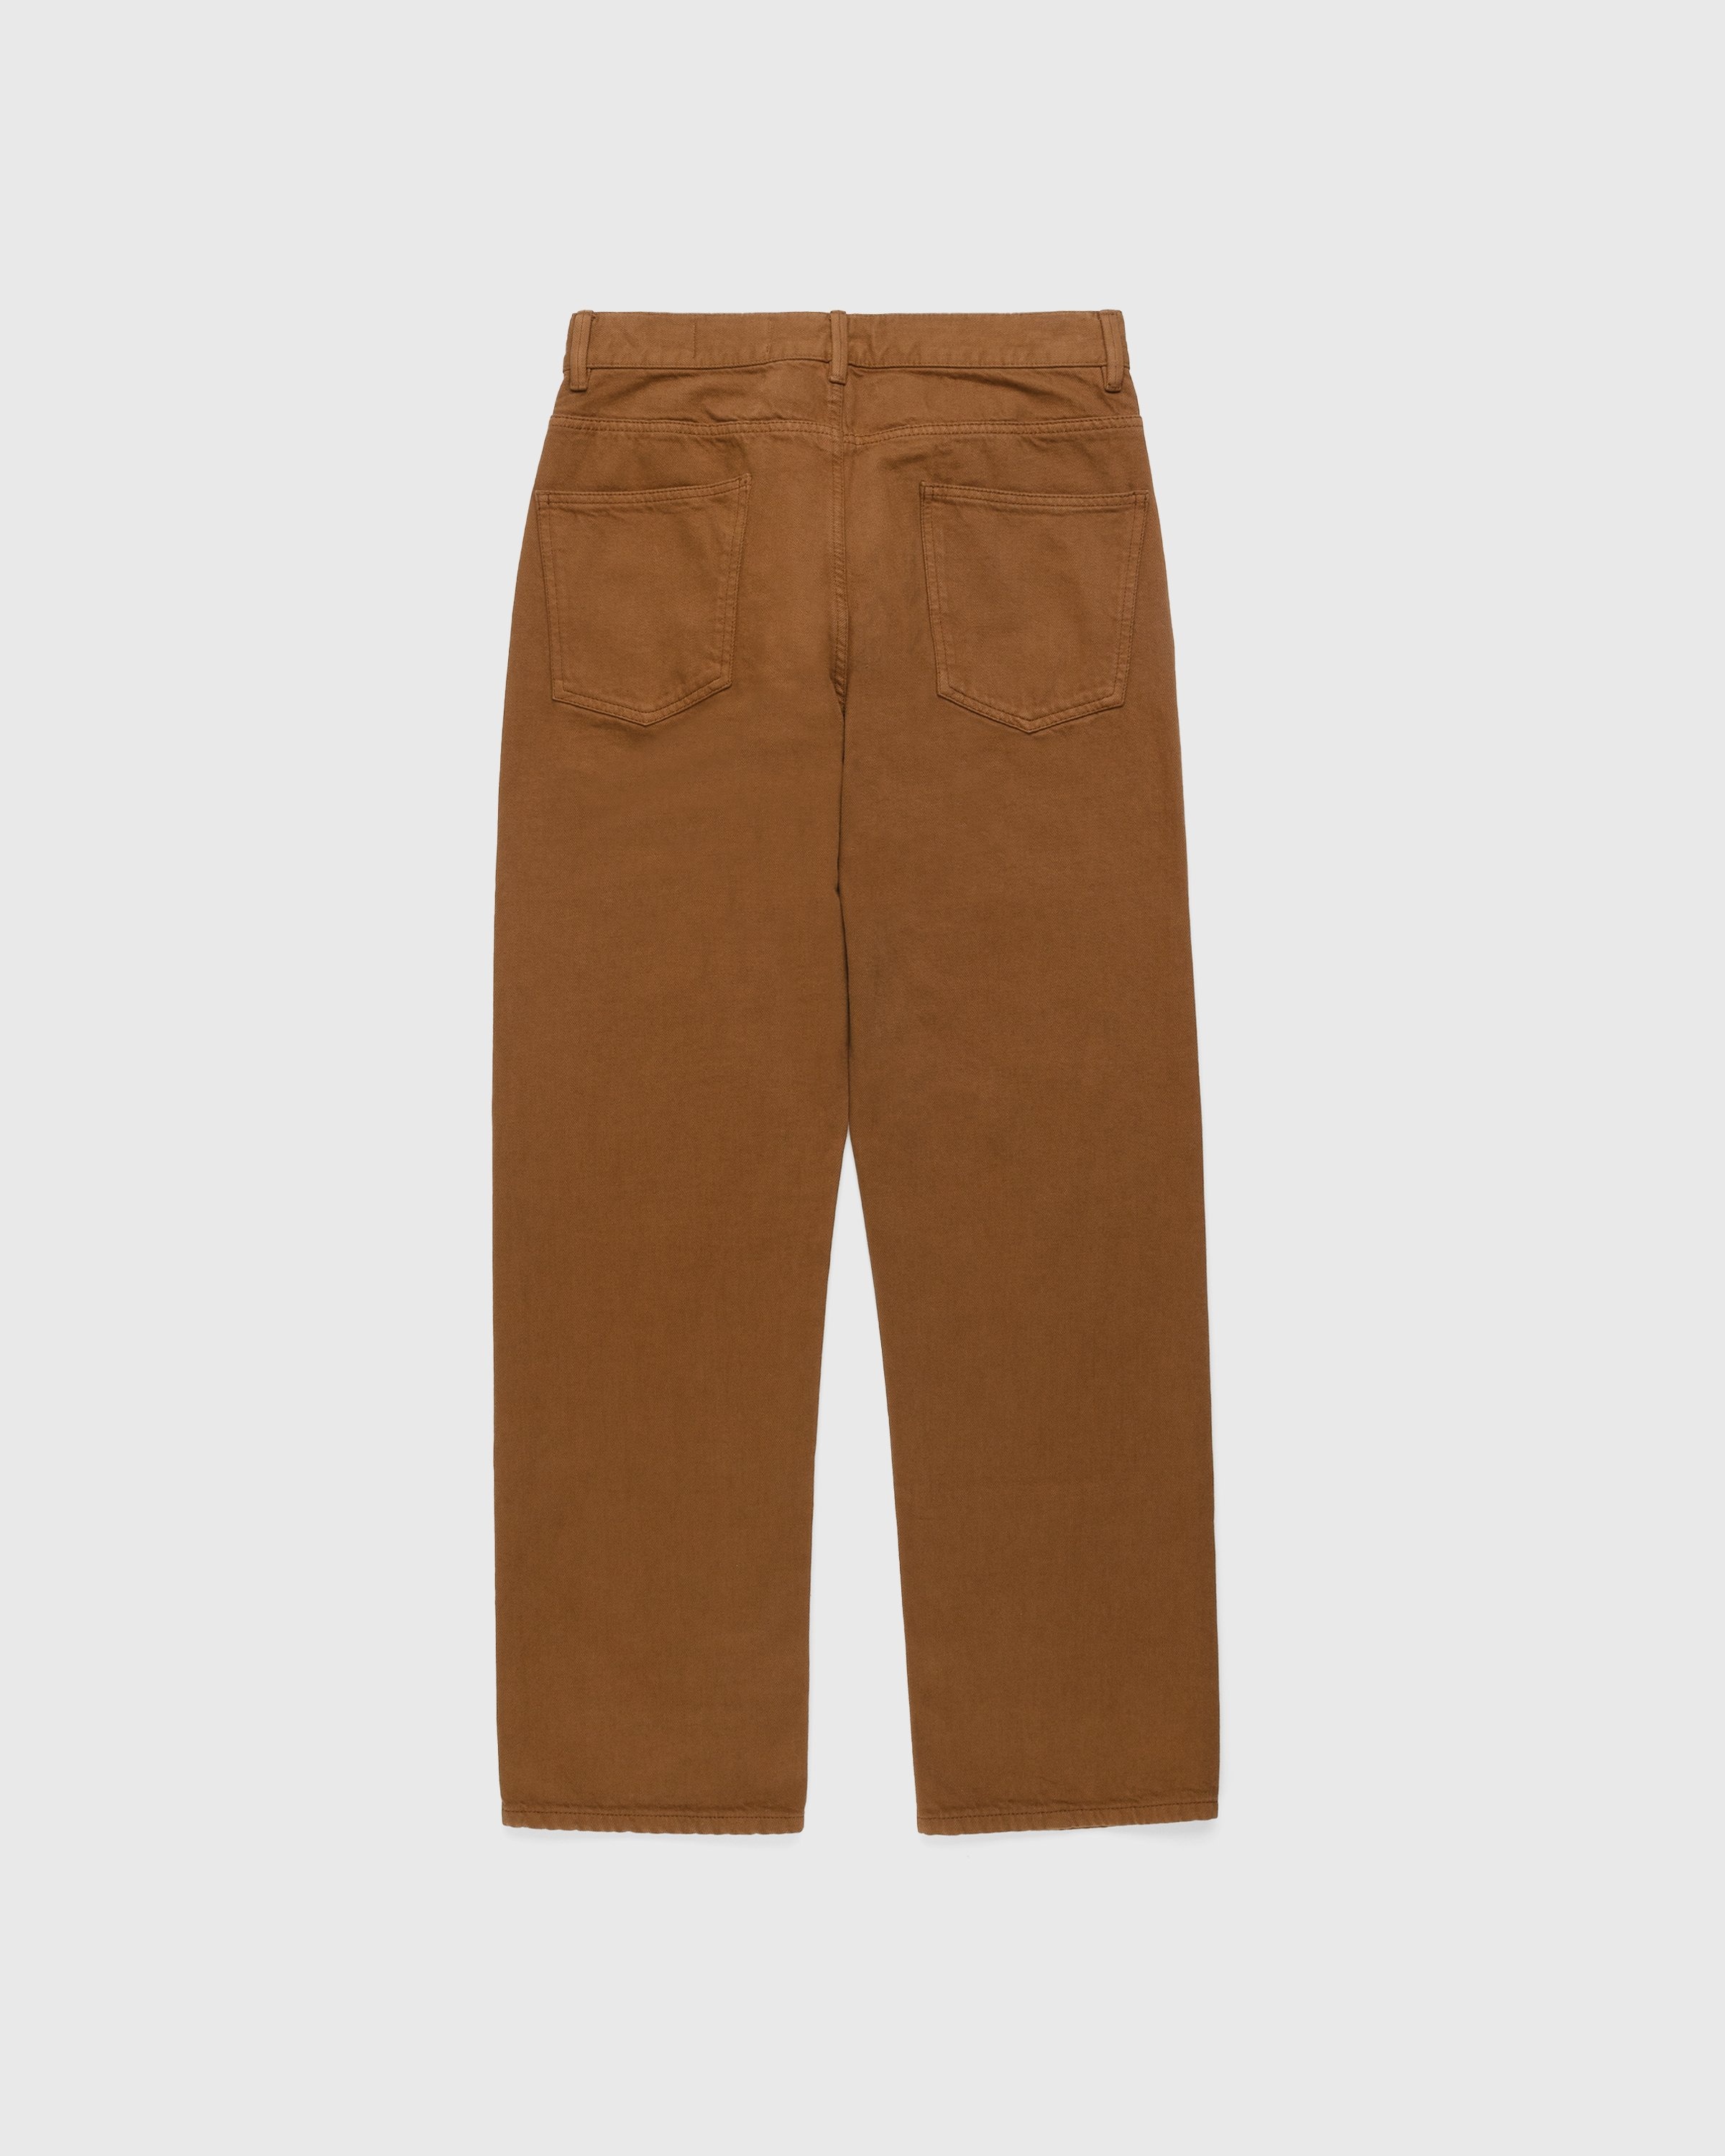 Lemaire – Seamless Jeans Brown - Denim - Brown - Image 2